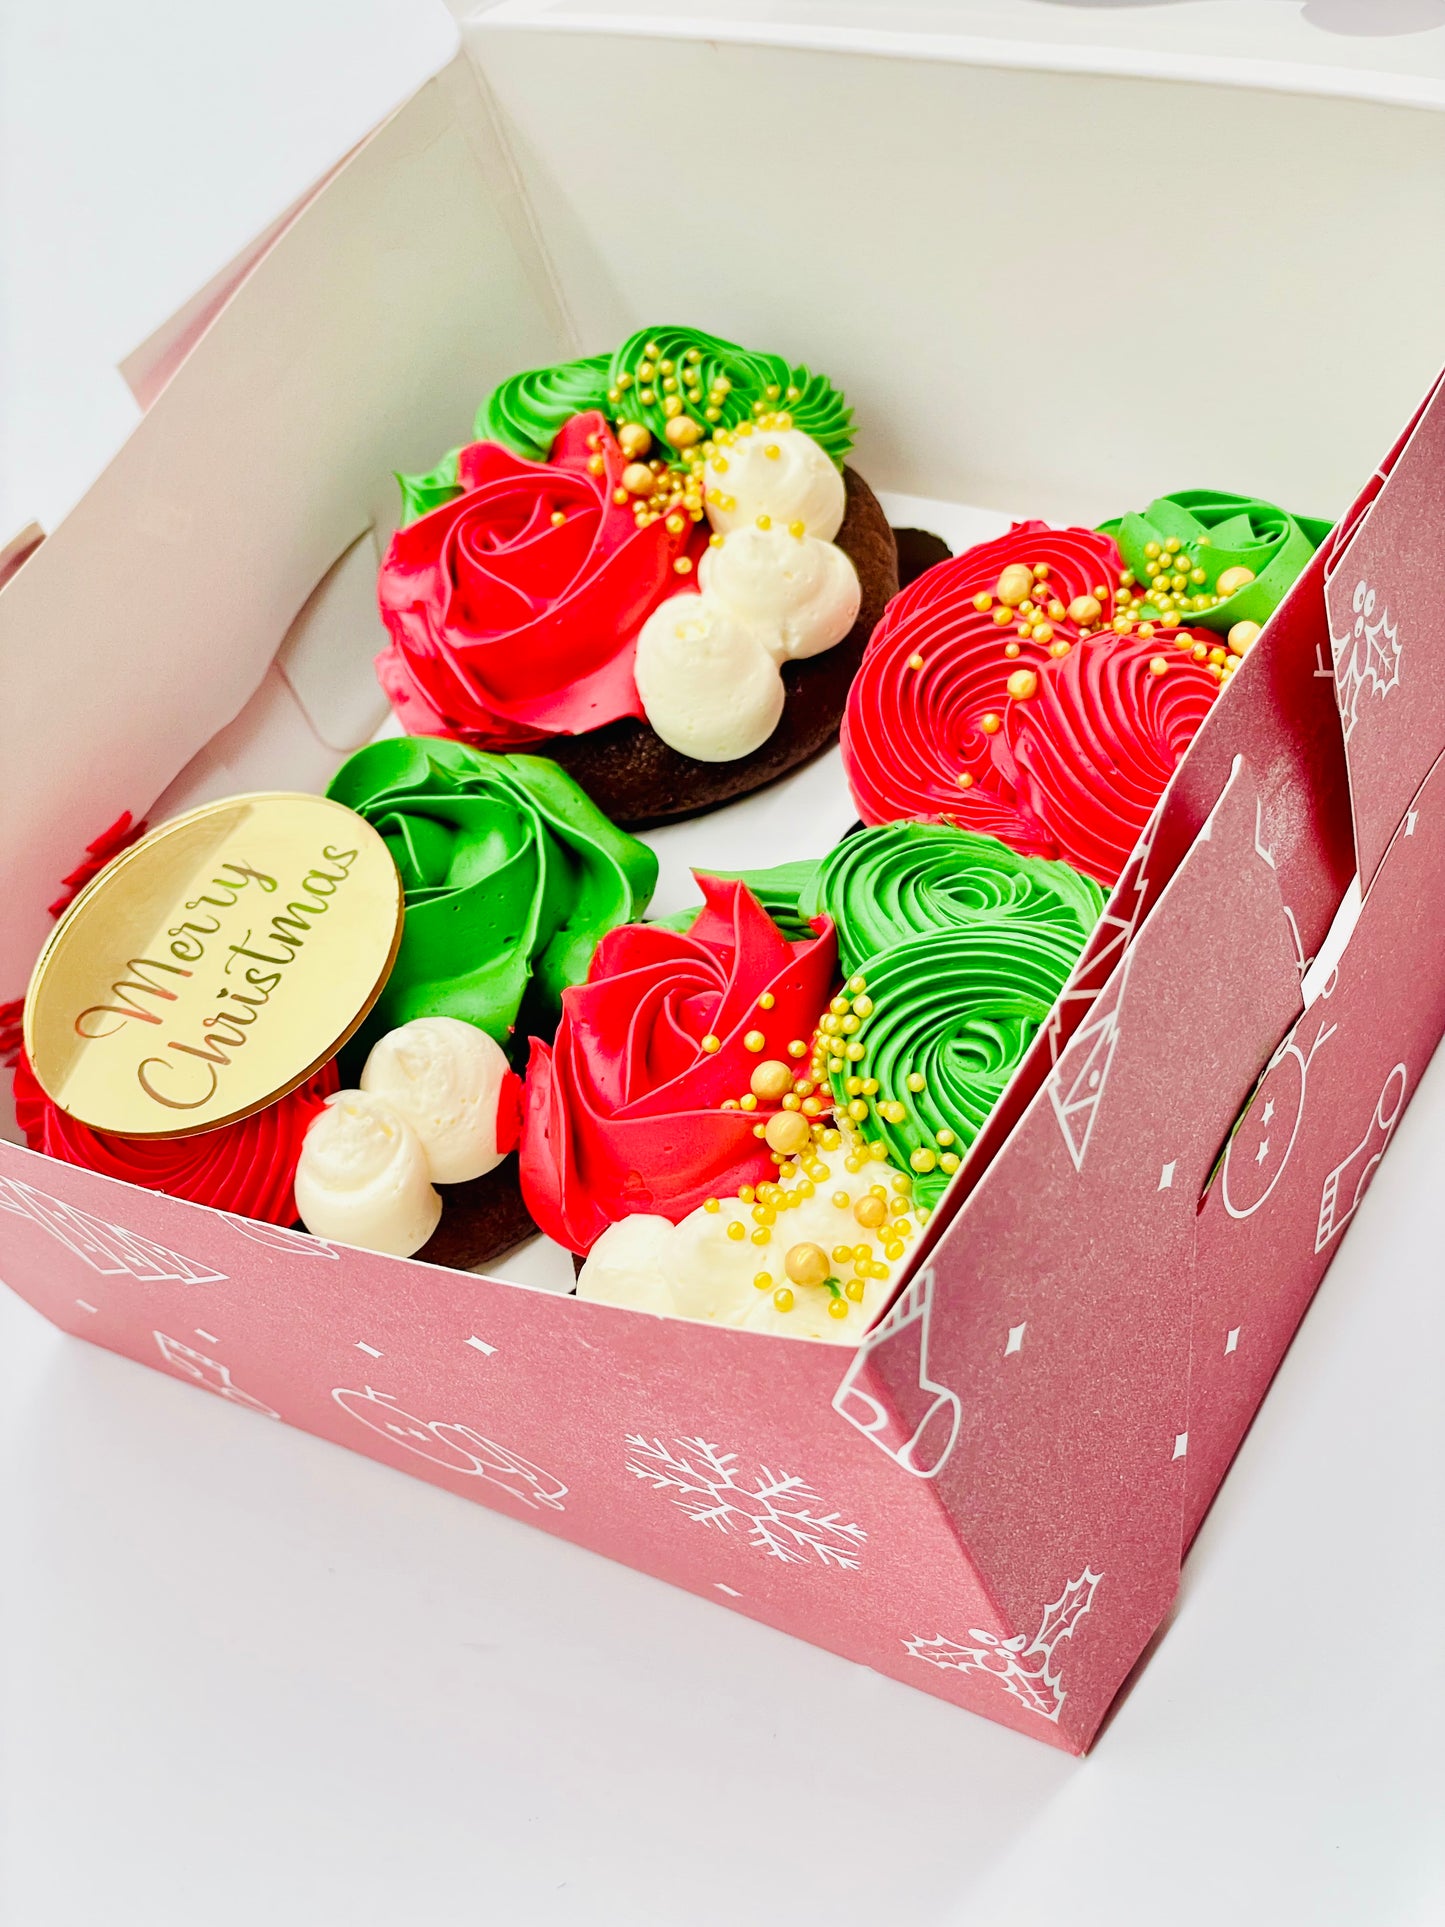 Load image into Gallery viewer, Christmas Delight Cupcakes
